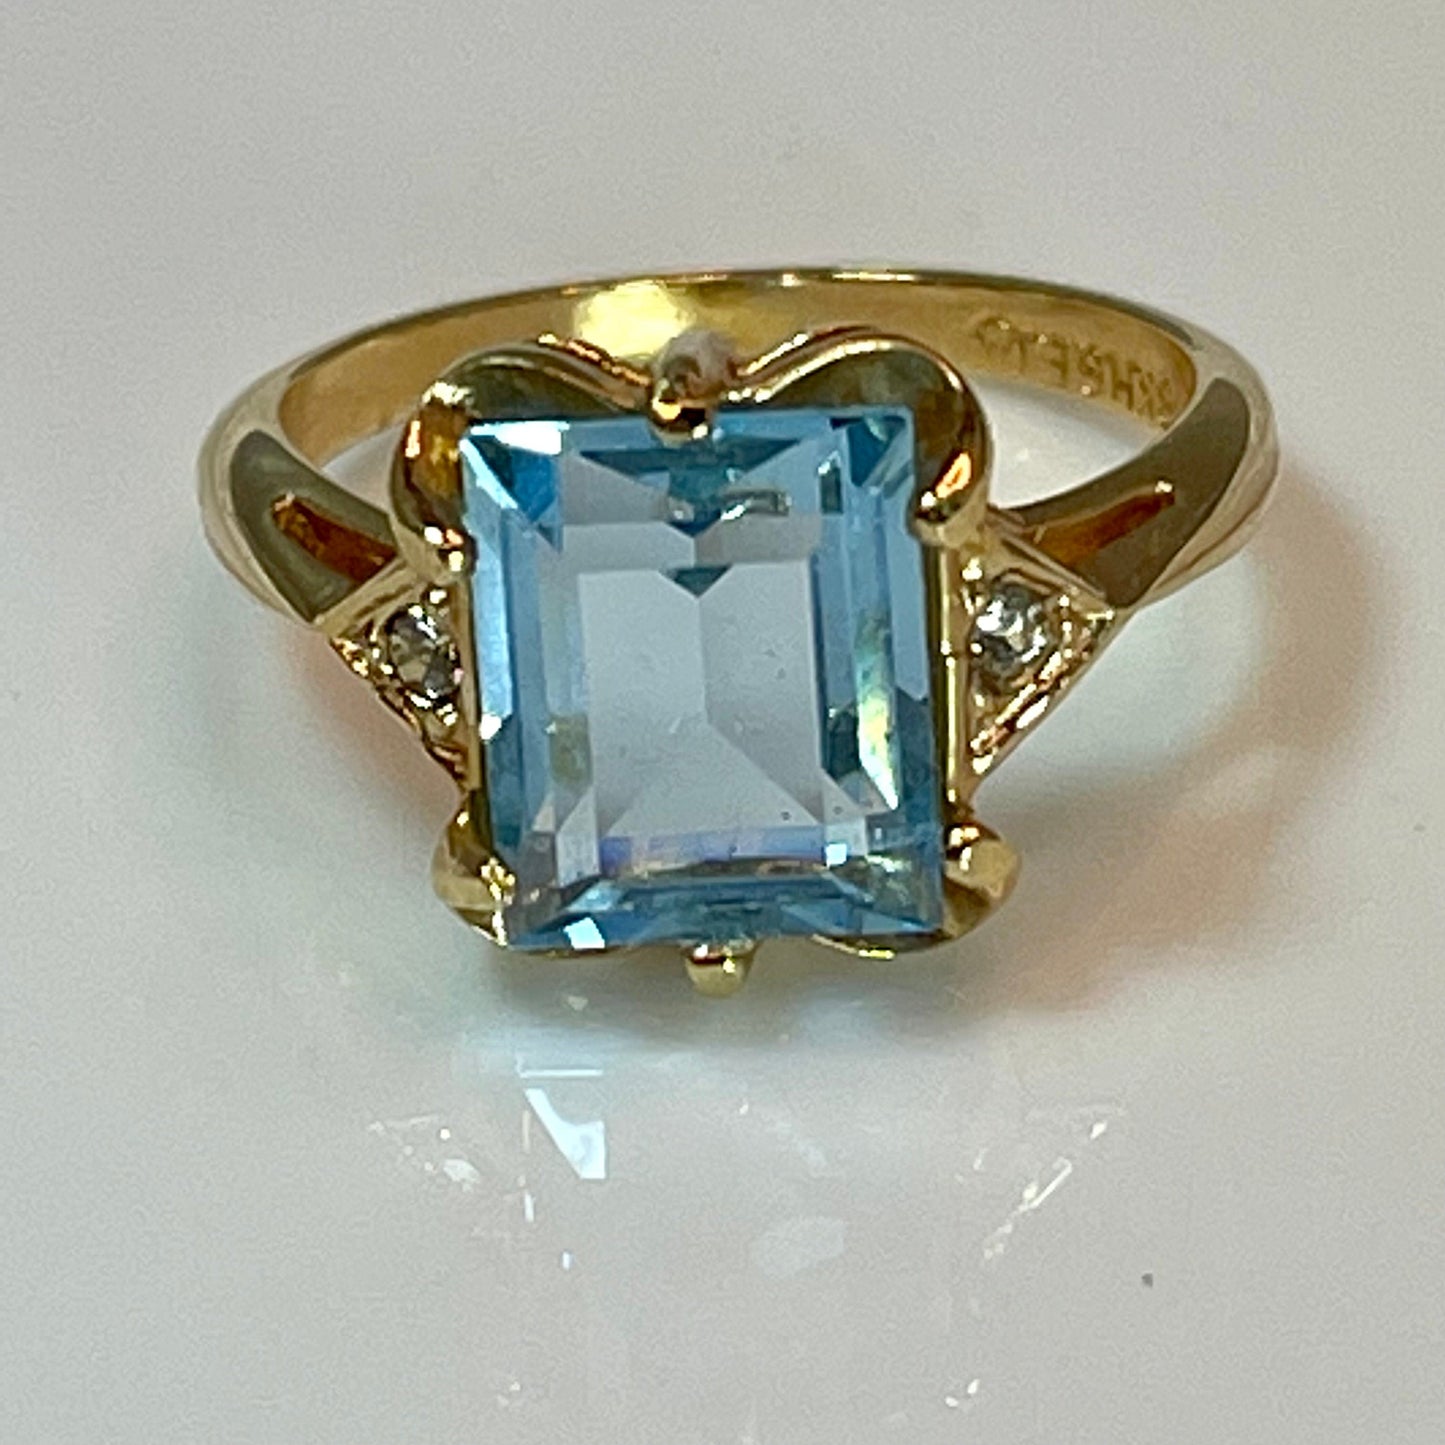 Vintage Ring Emerald Cut Blue Topaz Crystal 18kt Yellow Gold Eectroplated Ring December Birthstone by PVD Vintage Jewelry